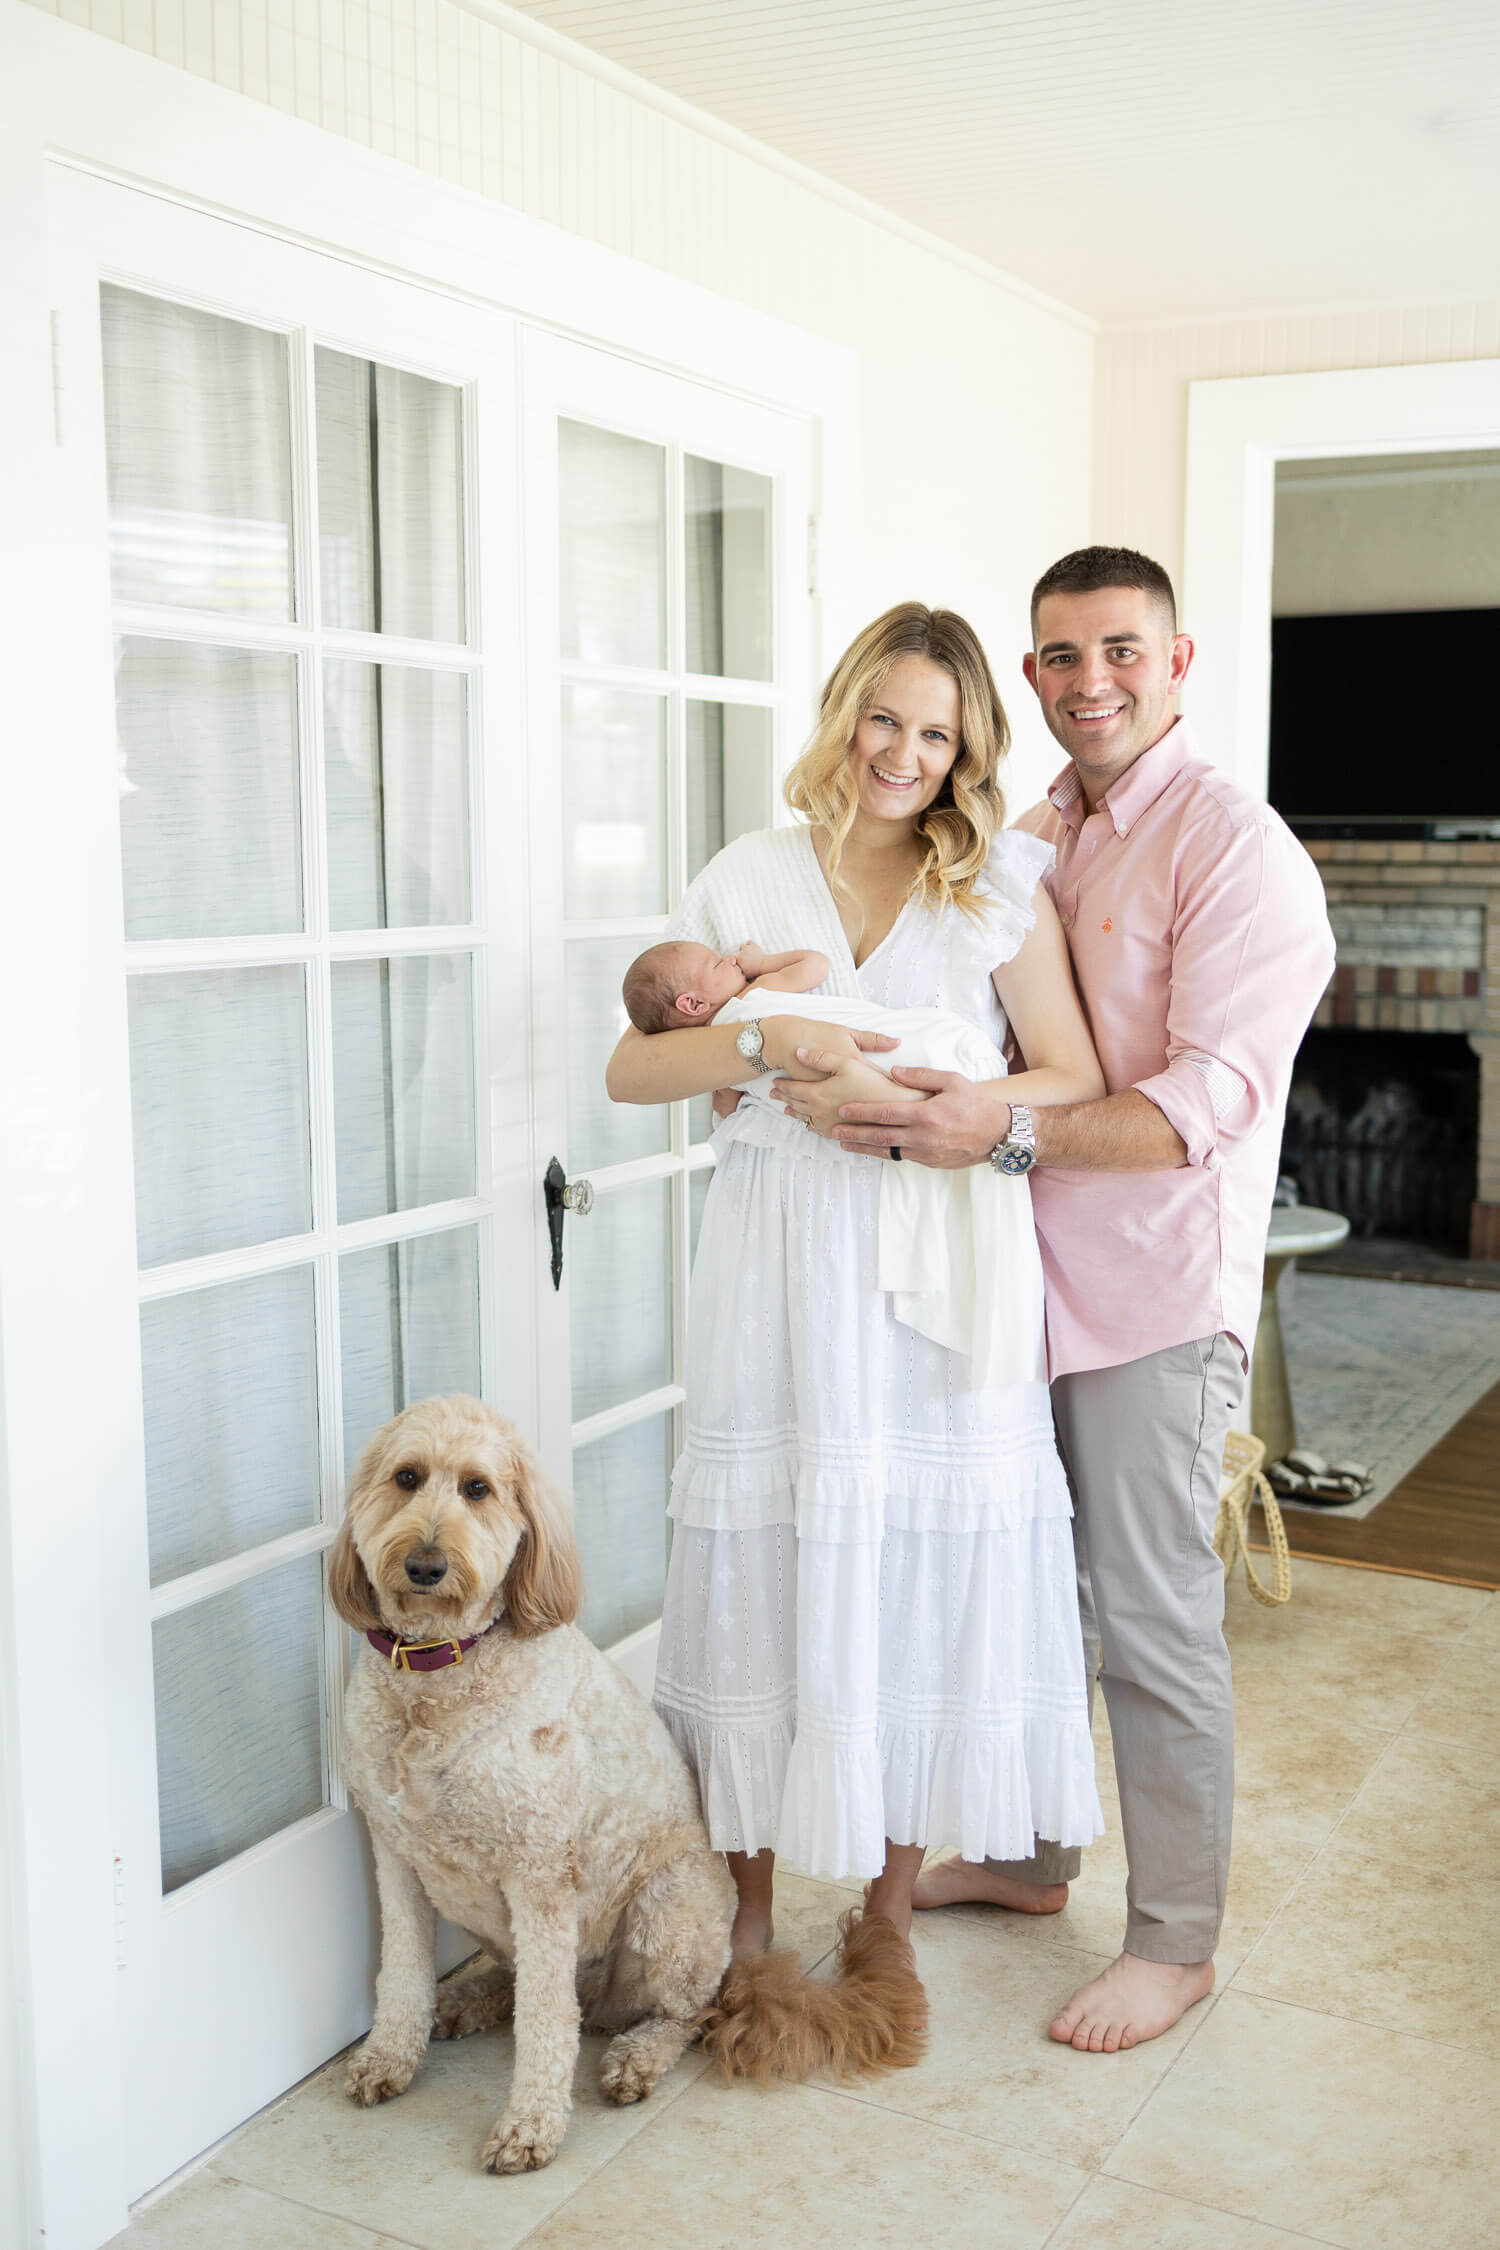 family photo with newborn and dog